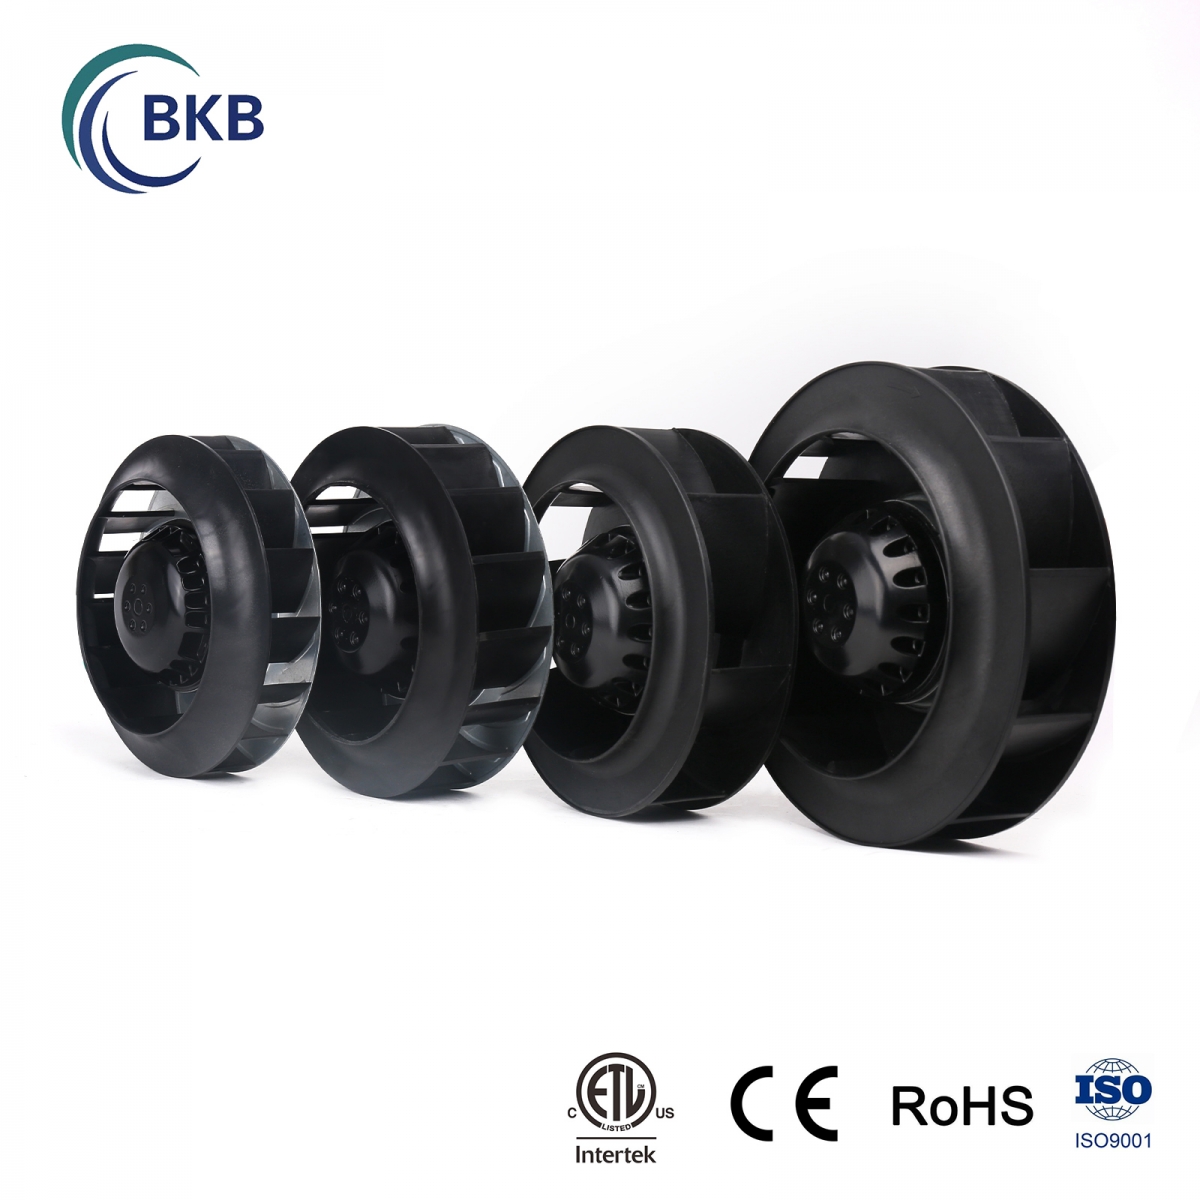 ETL MANUFACTURER PRODUCER -METAL BLADE CENTRIFUGAL FAN & INLINE DUCT FAN CARBON FILTER IN CHINA .-SUNLIGHT BLOWER,Centrifugal Fans, Inline Fans,Motors,Backward curved centrifugal fans ,Forward curved centrifugal fans ,inlet fans, EC fans